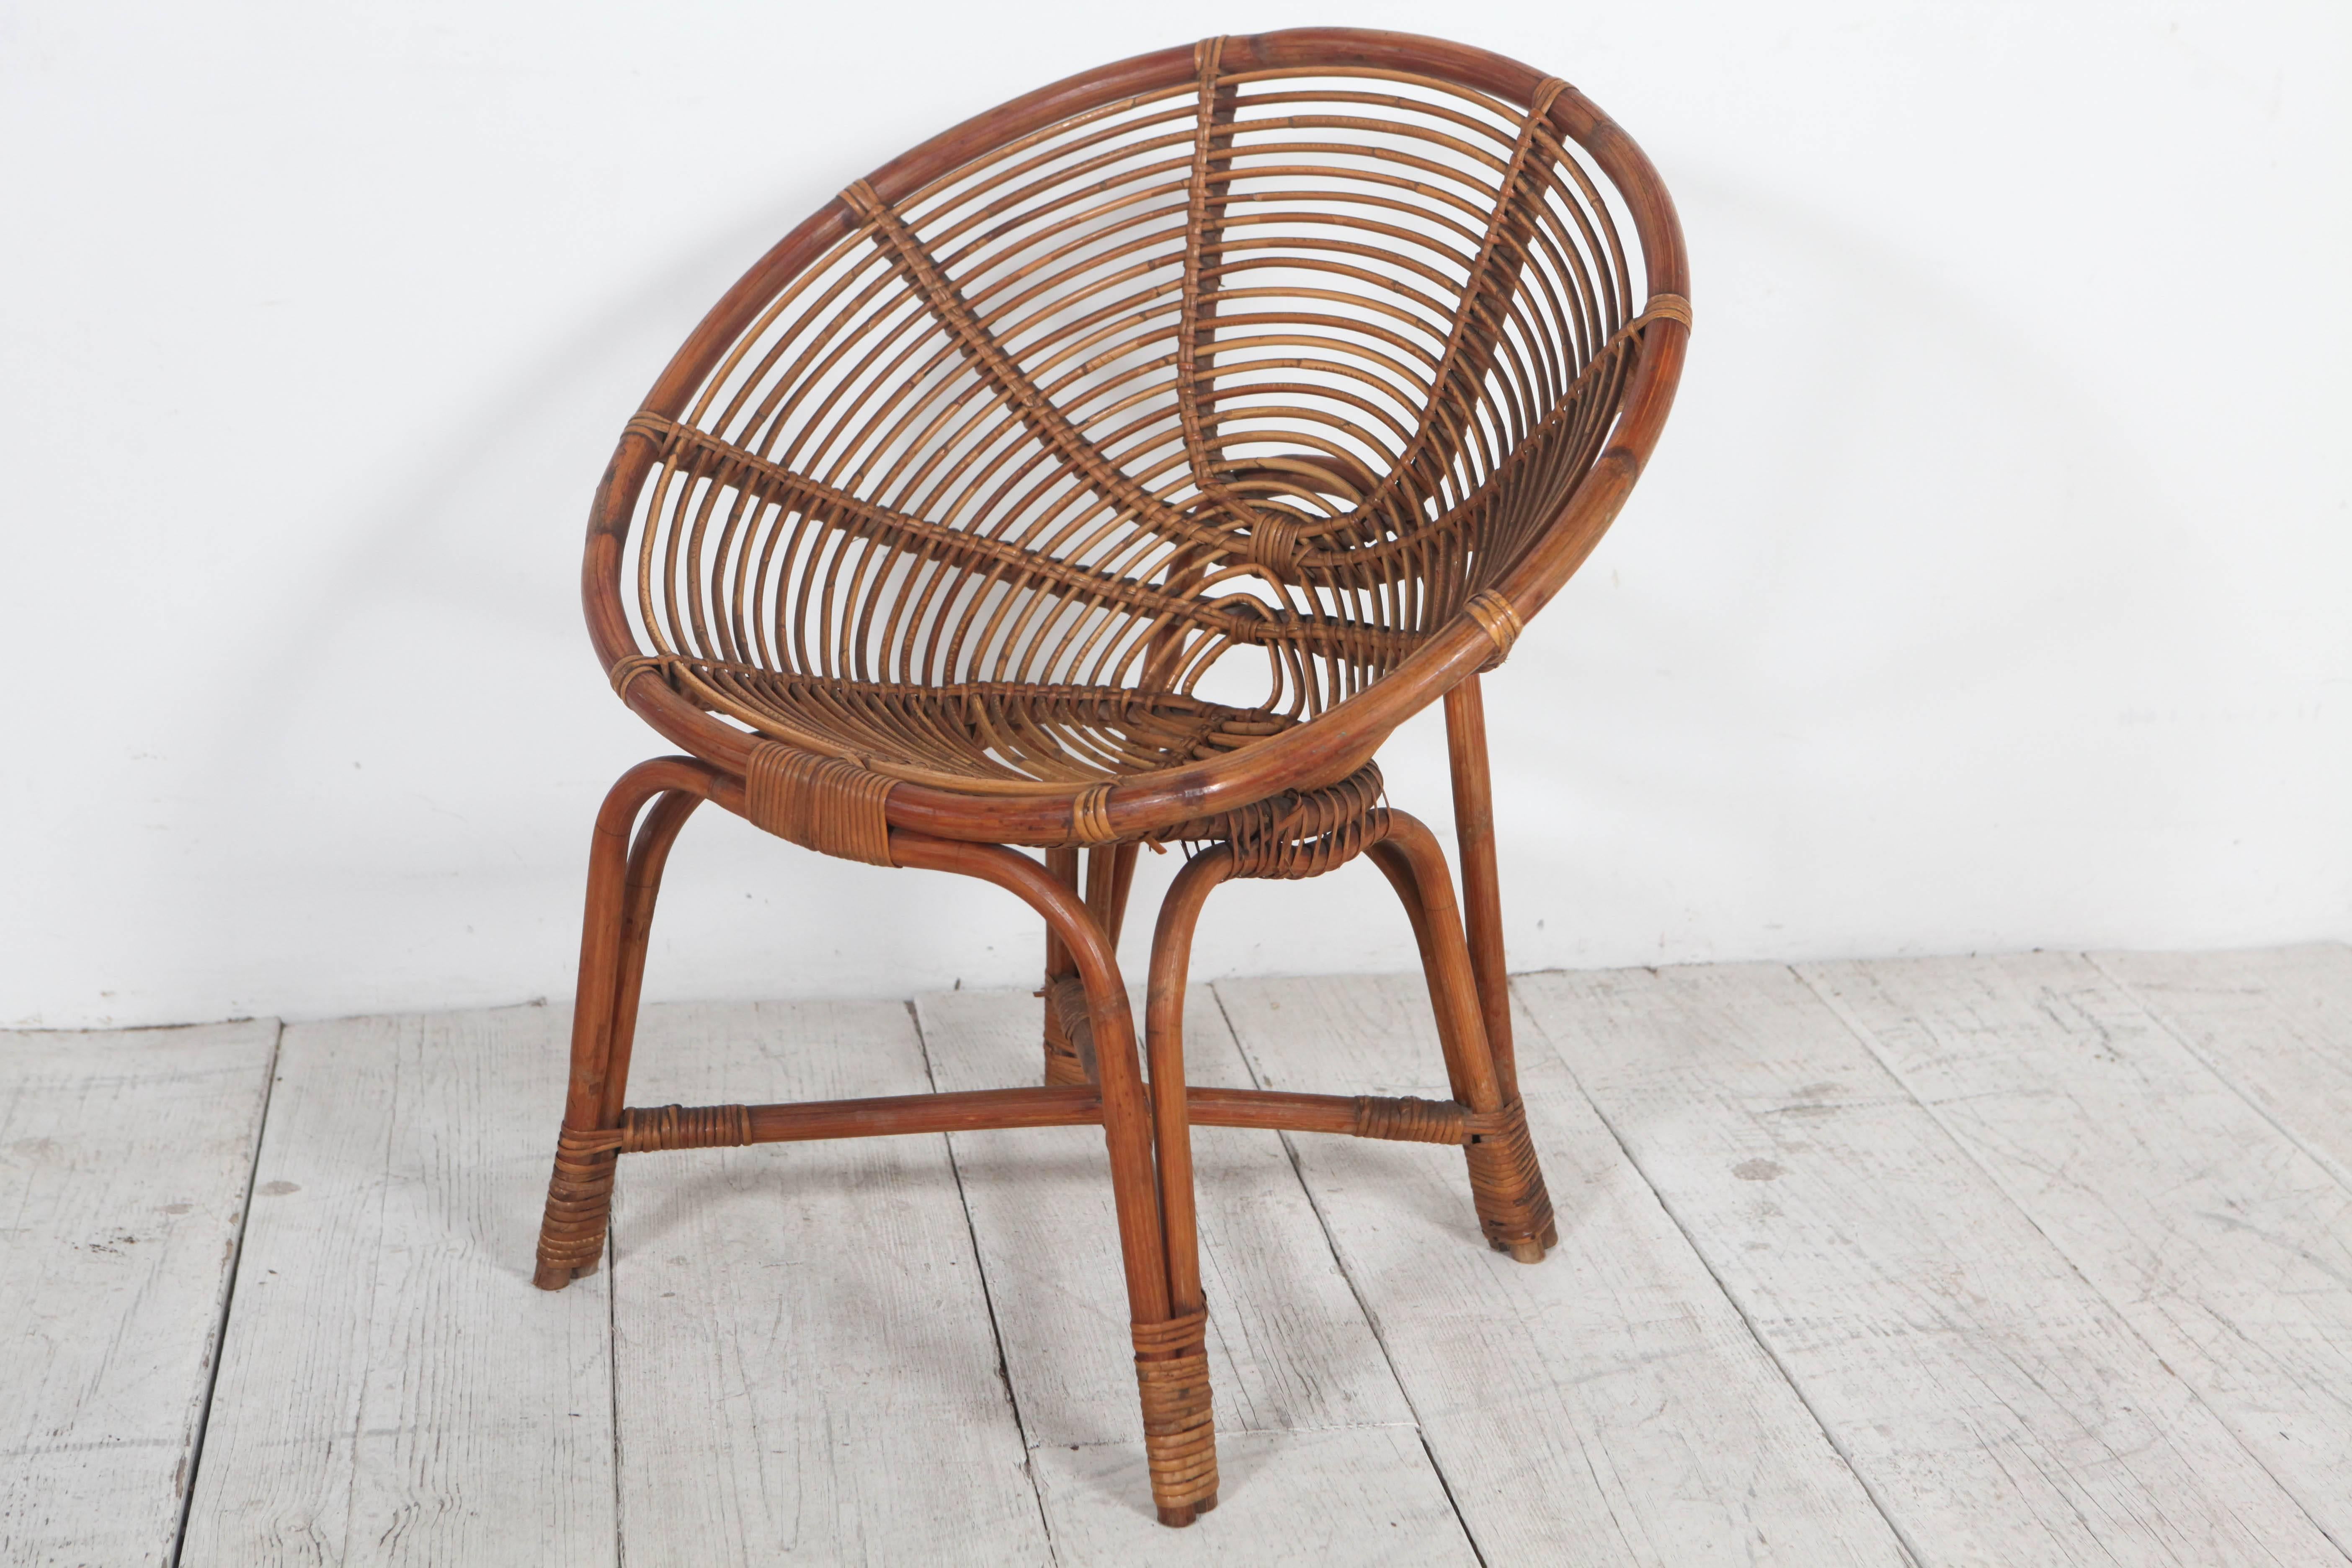 Wicker rattan round occasional chairs.